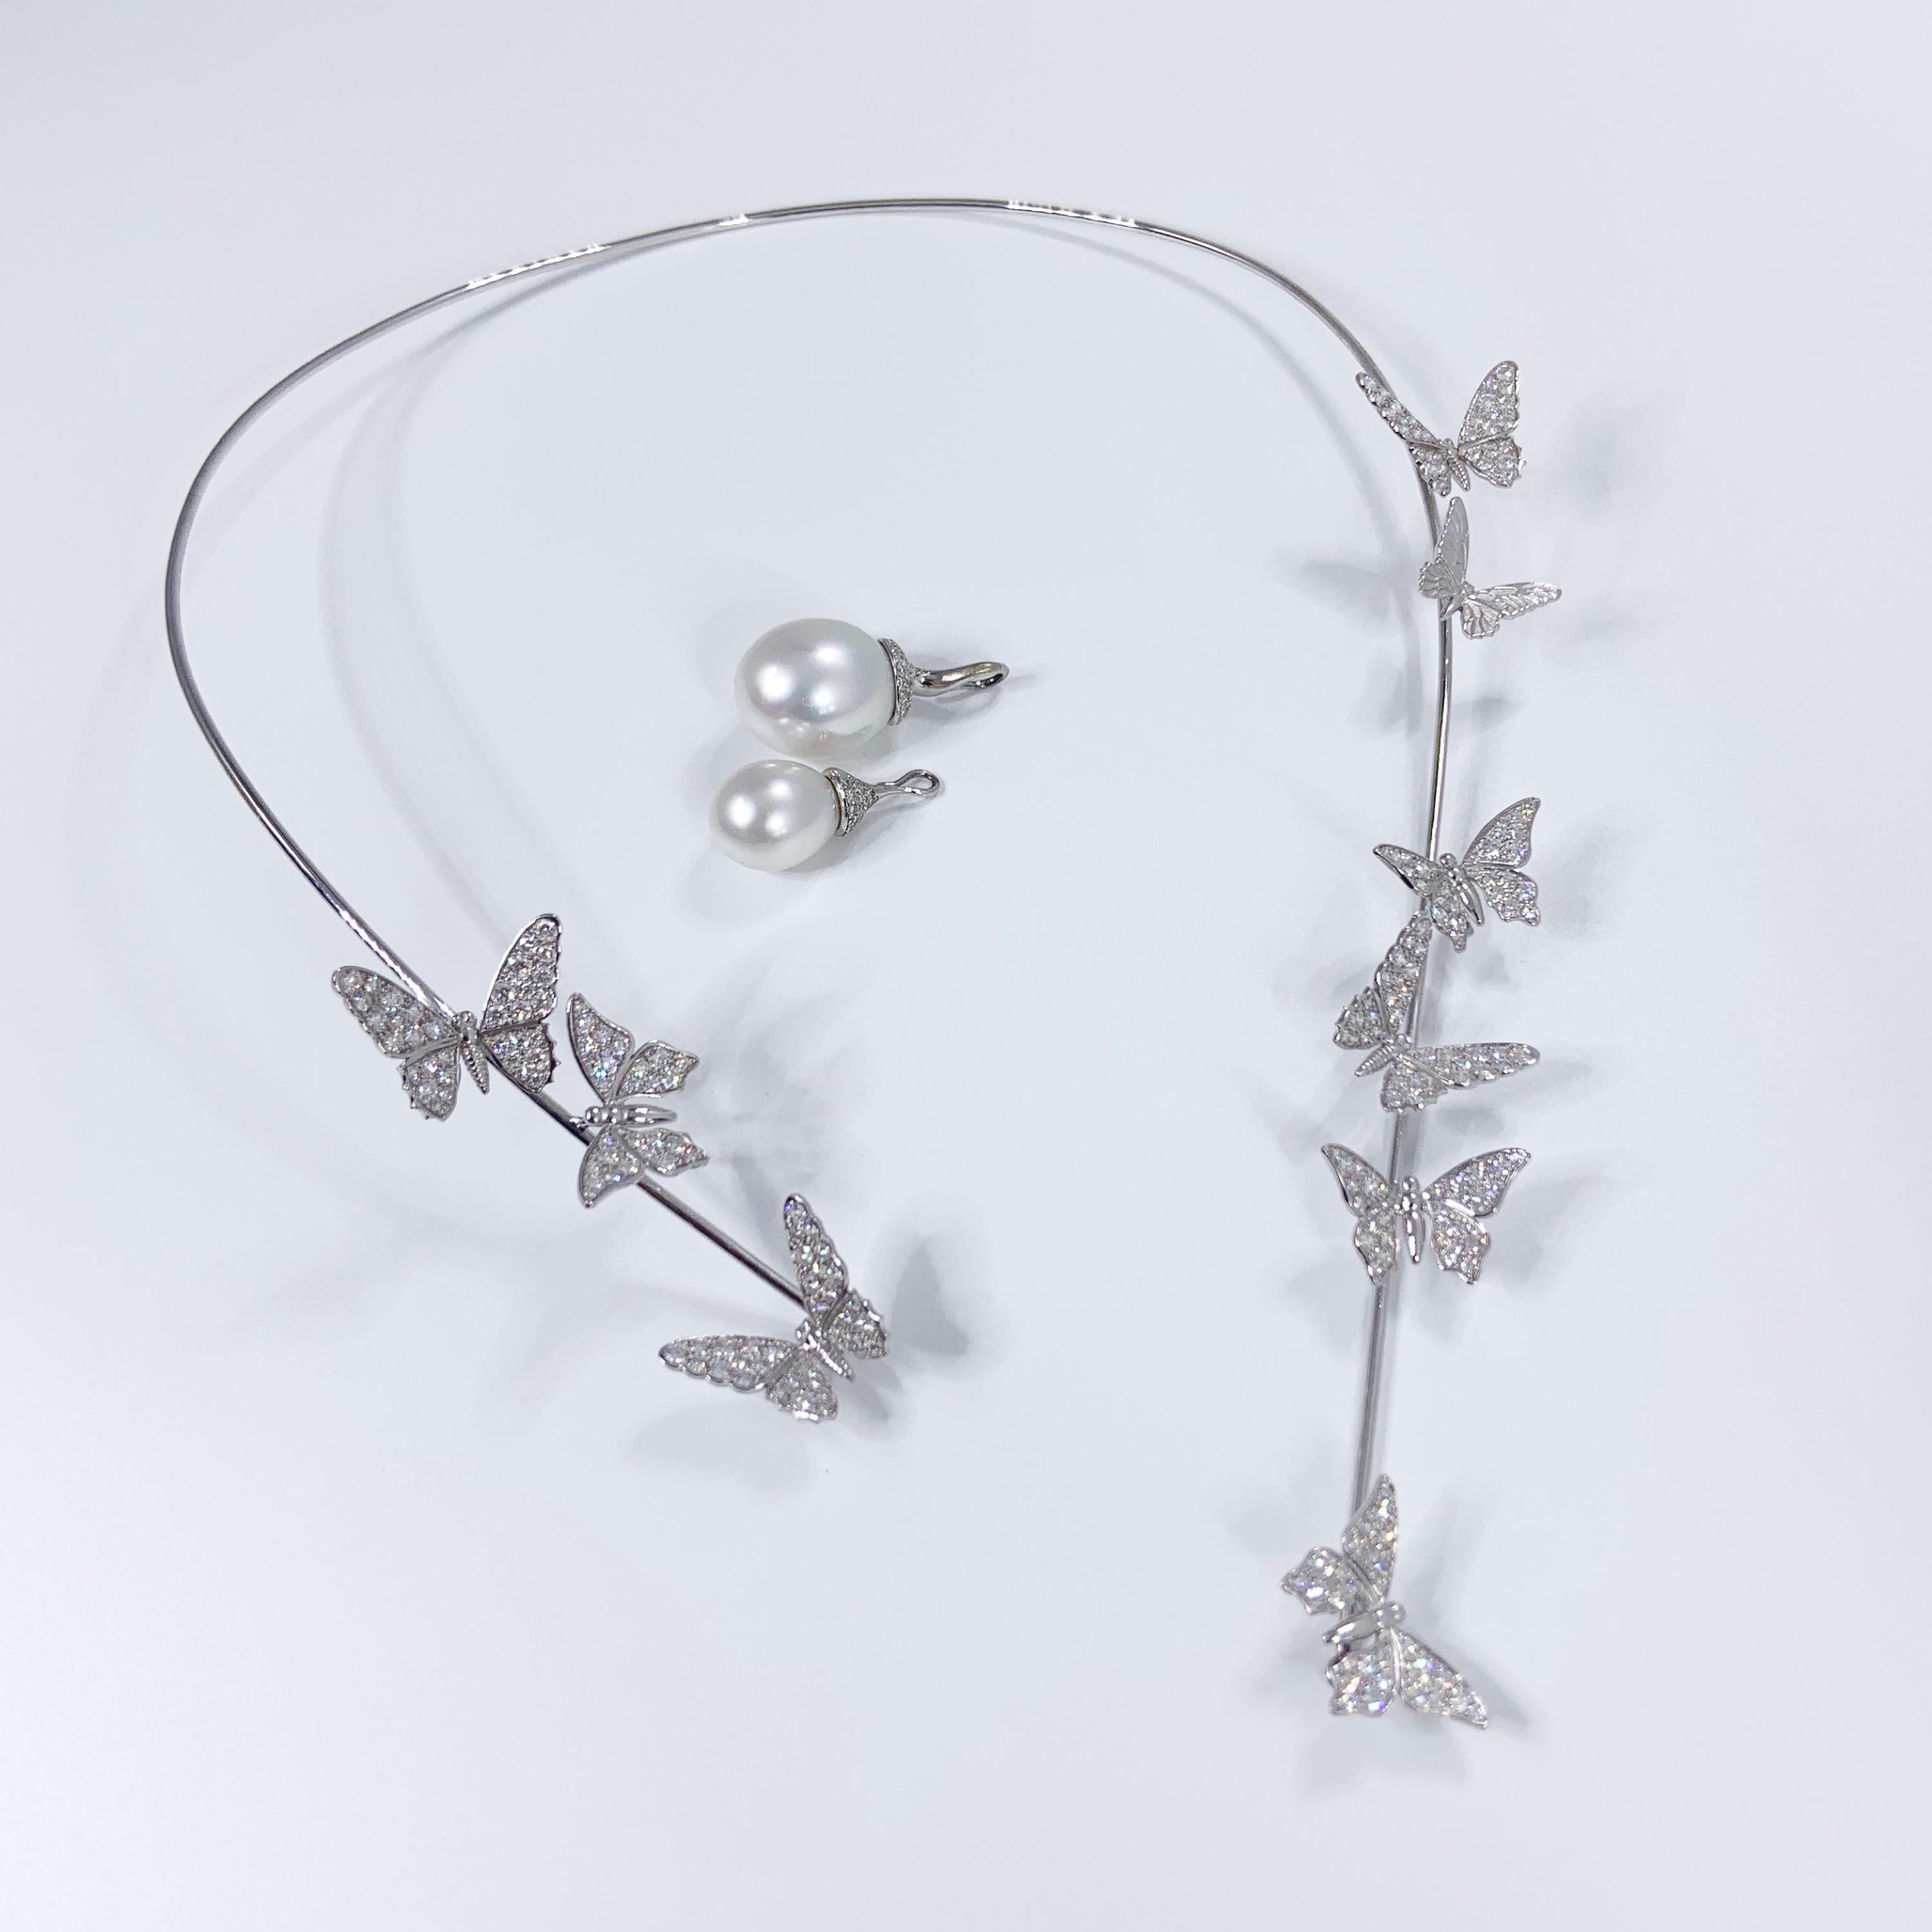 Brilliant Cut Butterfly 18K White Gold Open Necklace with Diamonds and Akoya Pearls by Édéenne